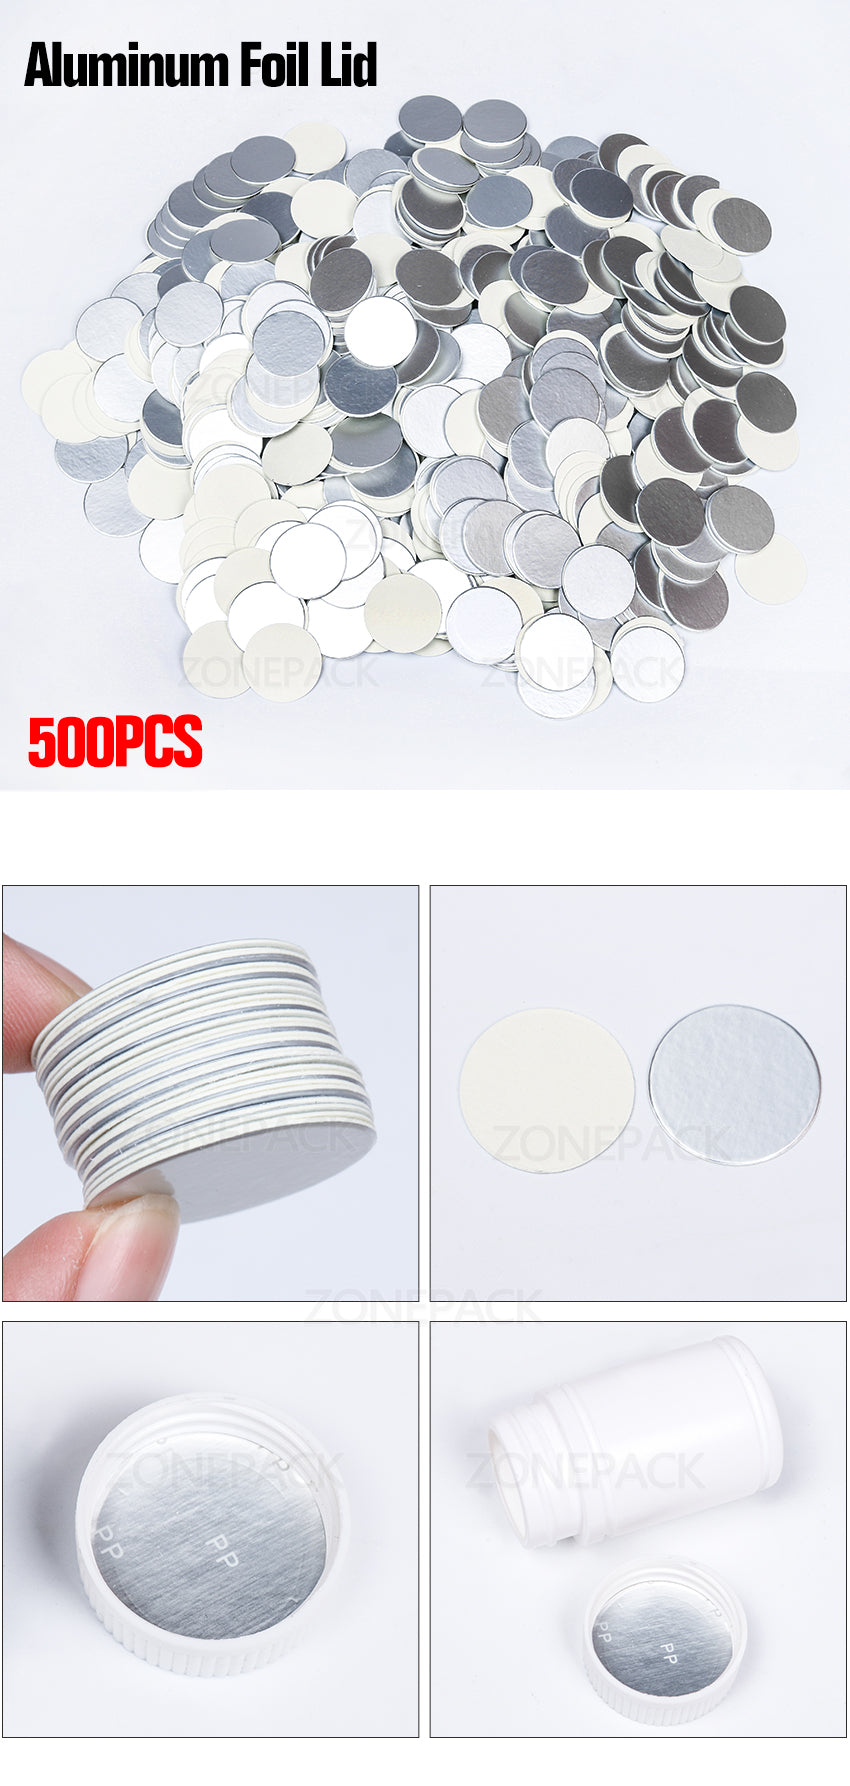 ZONEPACK Induction Sealing Customized Size Plastic laminated Aluminum Foil Lid Liners 500pcs/packed for PP PET PVC PS ABS glass bottles